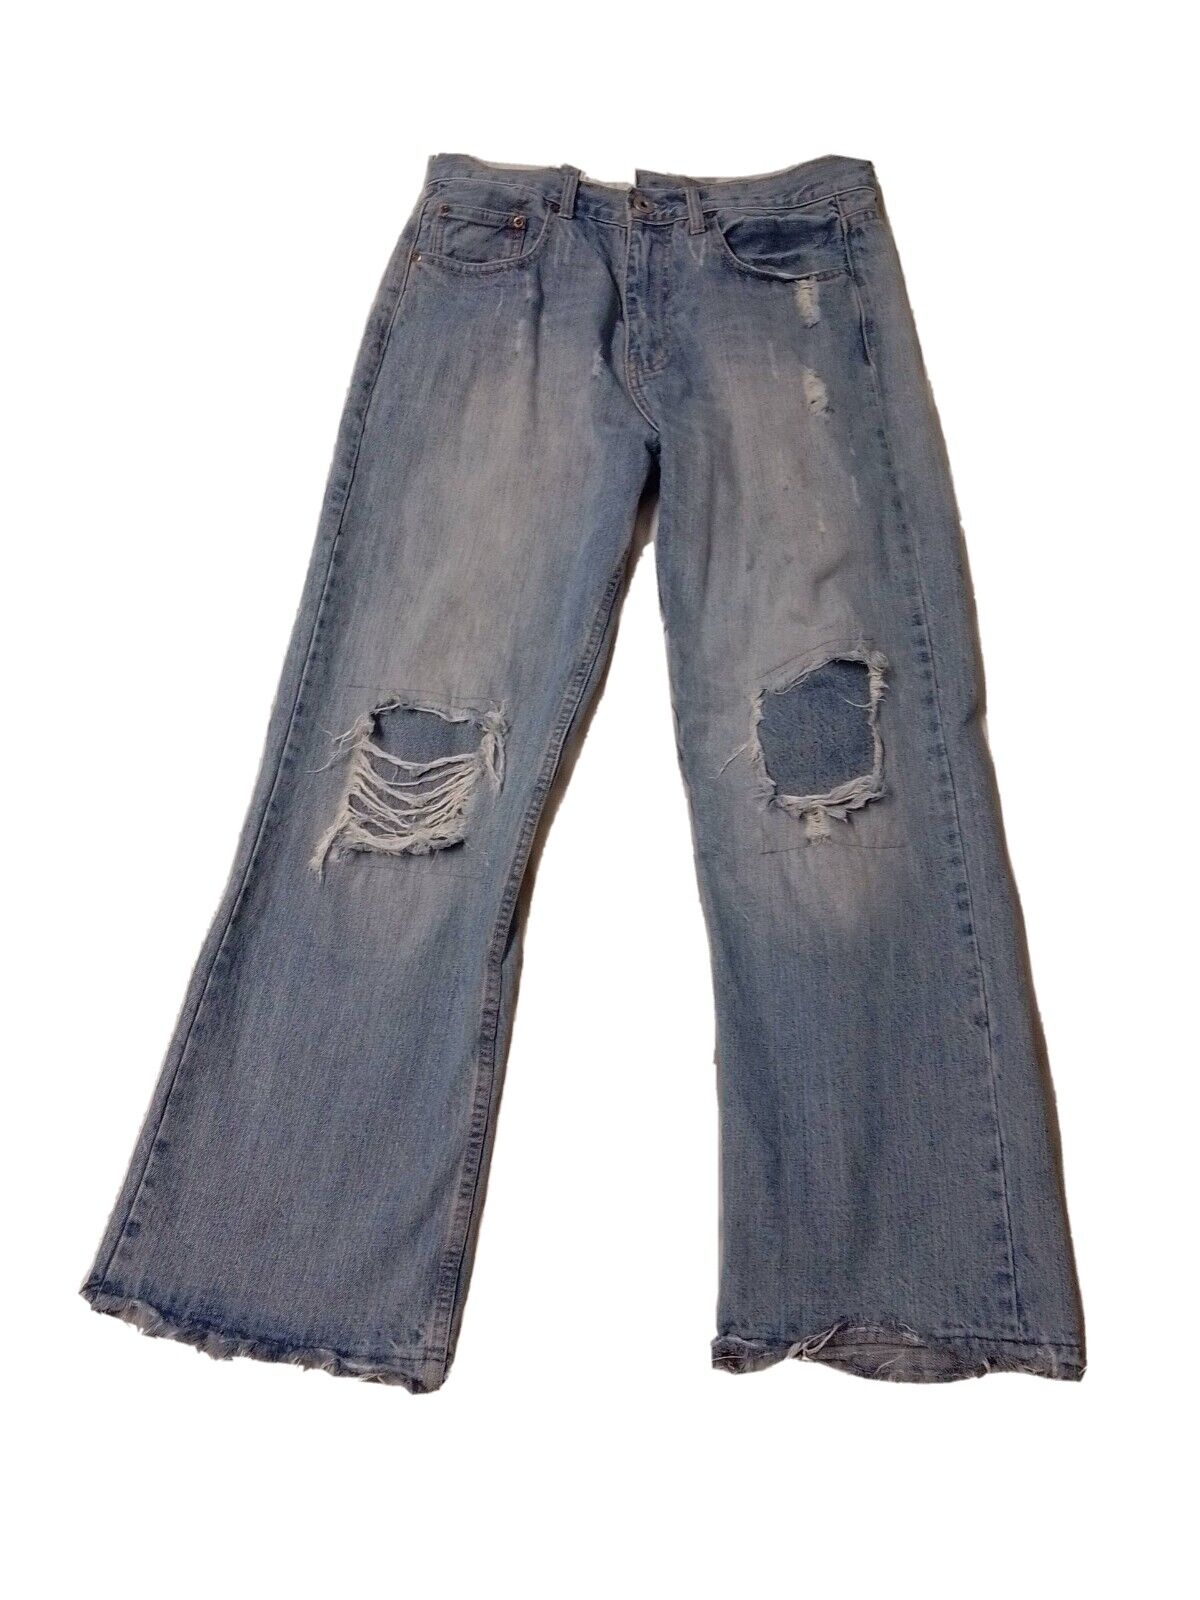 CLEARANCE Hollister 32x30 Blue Jeans distressed holes stains cutoffs as-is Raw